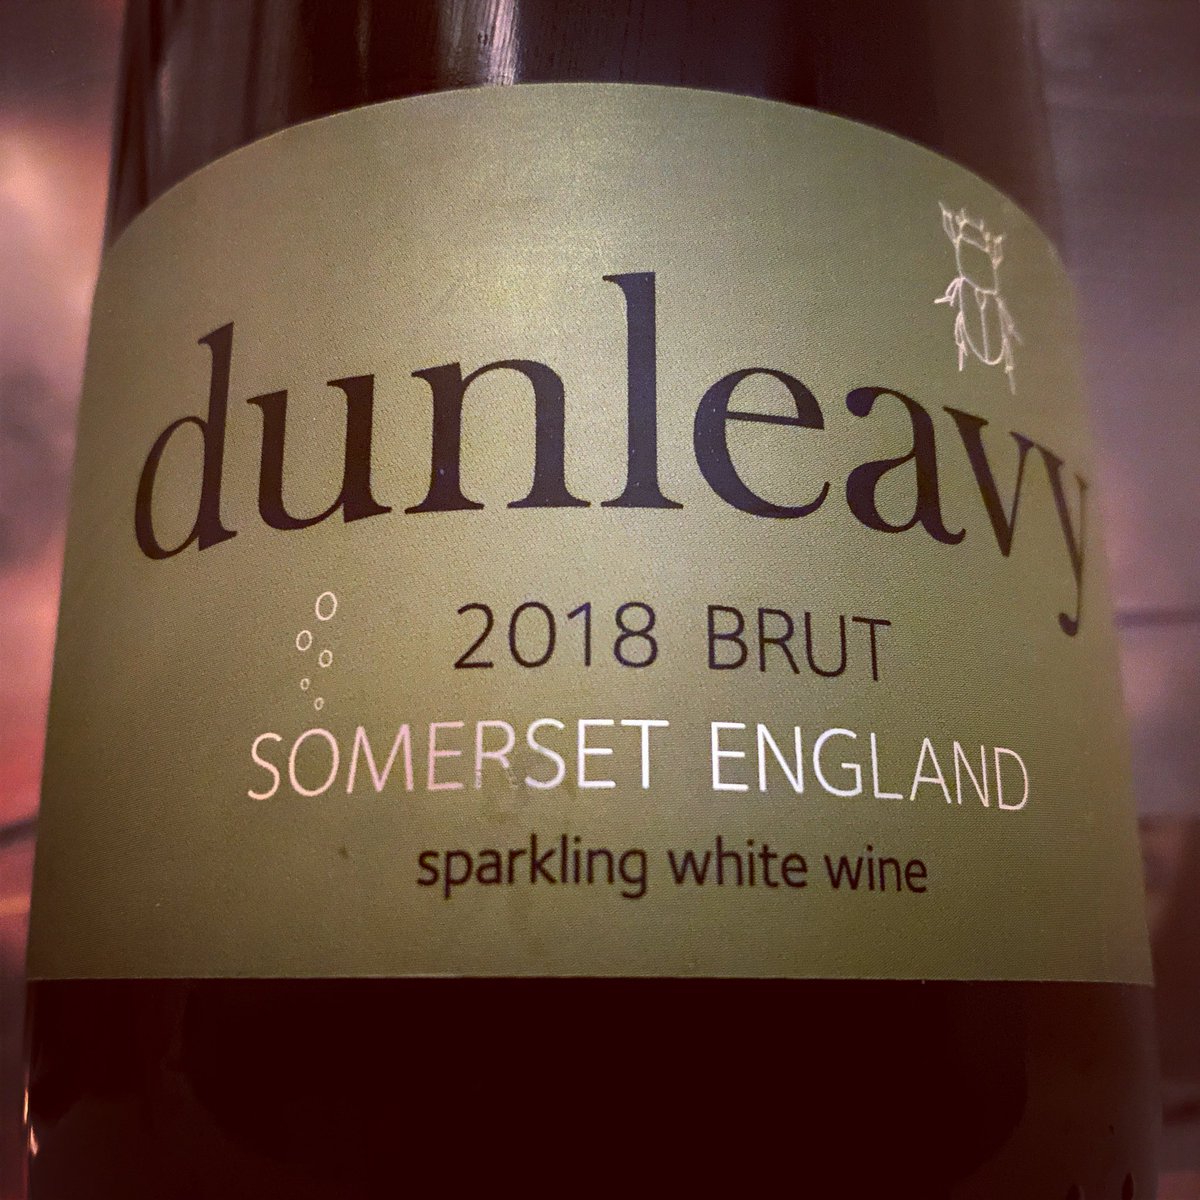 The Mighty White.
We’re desperate to start selling our next batch of sparkling white - just a few more weeks to wait and it’ll be back in our online shop! #sparklingwhite #sparklingwine #englishwine #wine #bristol #somerset #drink #food #shoplocal #lowintervention #sustainable